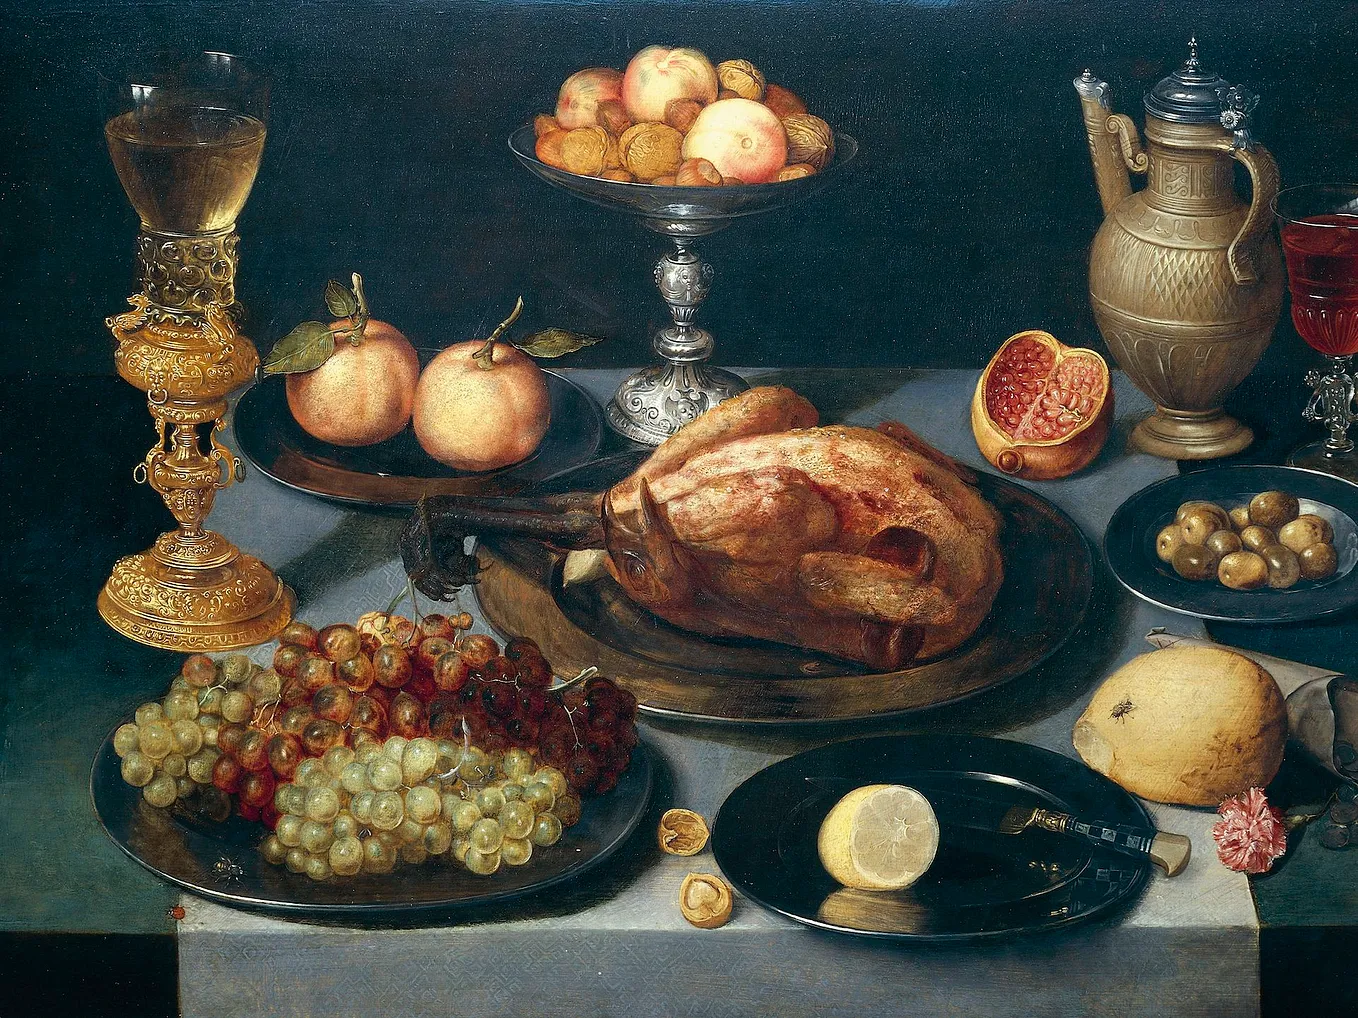 Dining table with fruits, roast chicken and wine glass. By Peter Binoit 1600–1625.